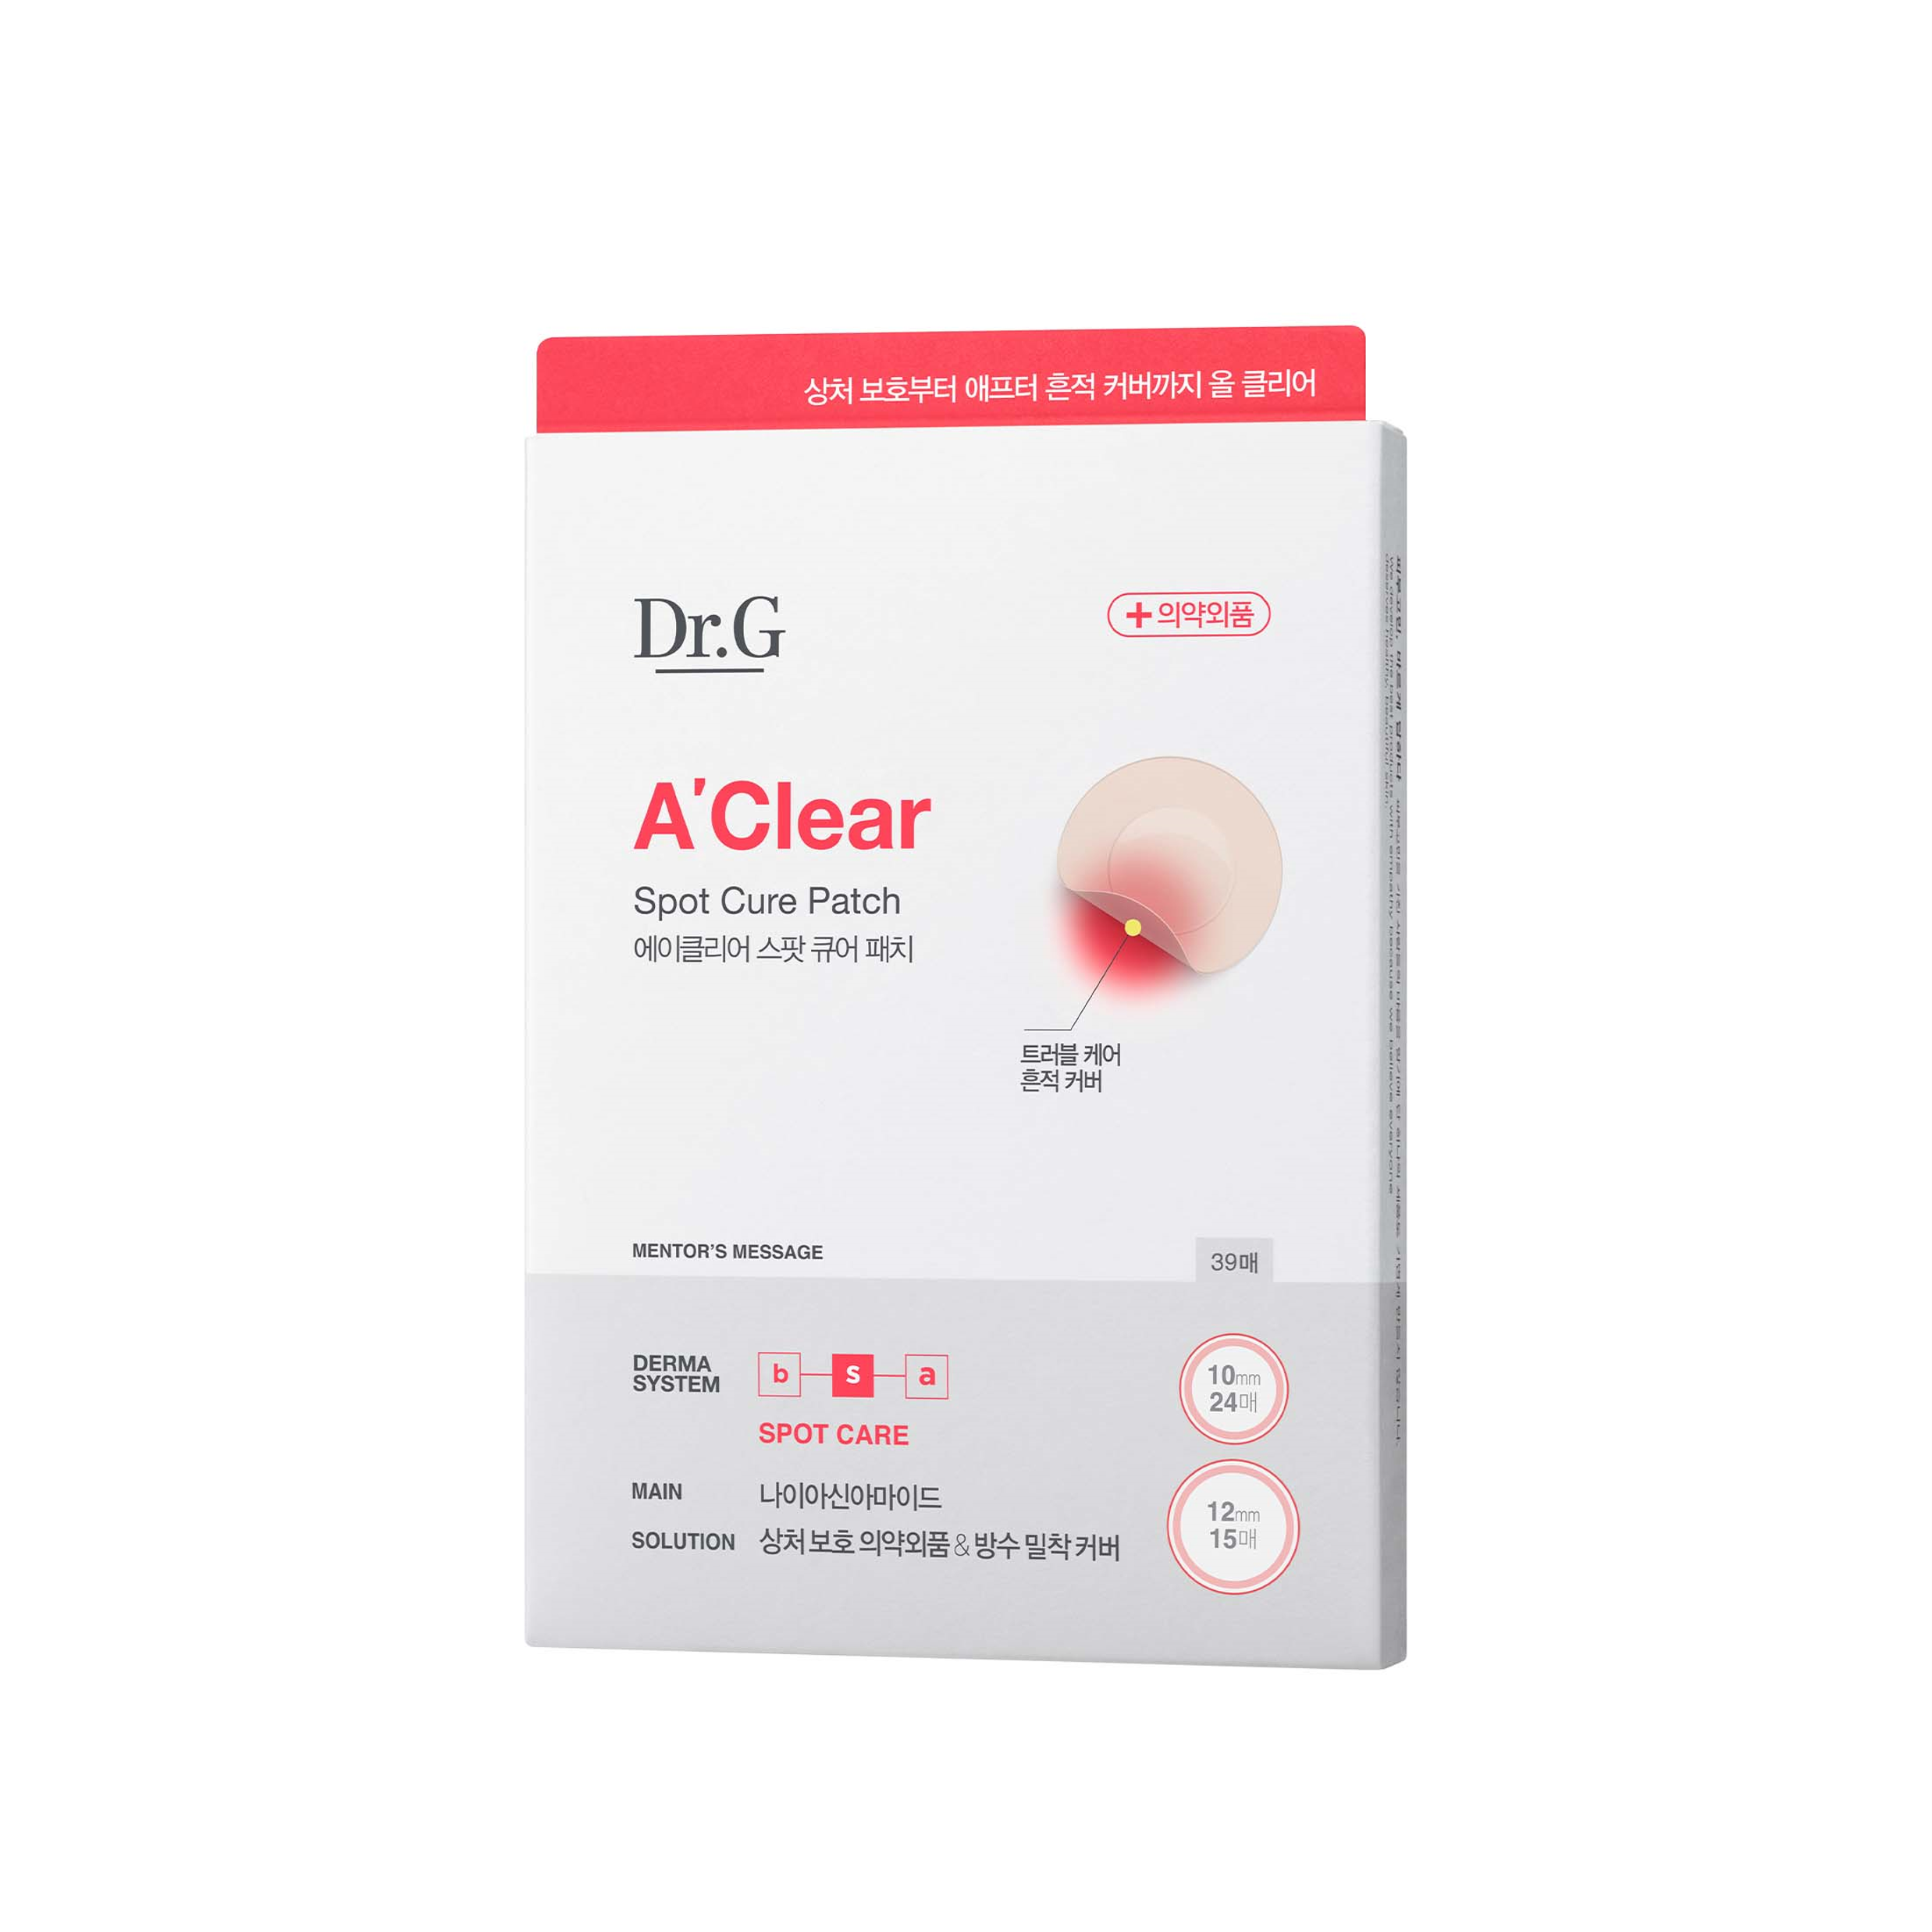 Miếng Dán Mụn Dr.G A'Clear Spot Cure Patch (39 miếng)